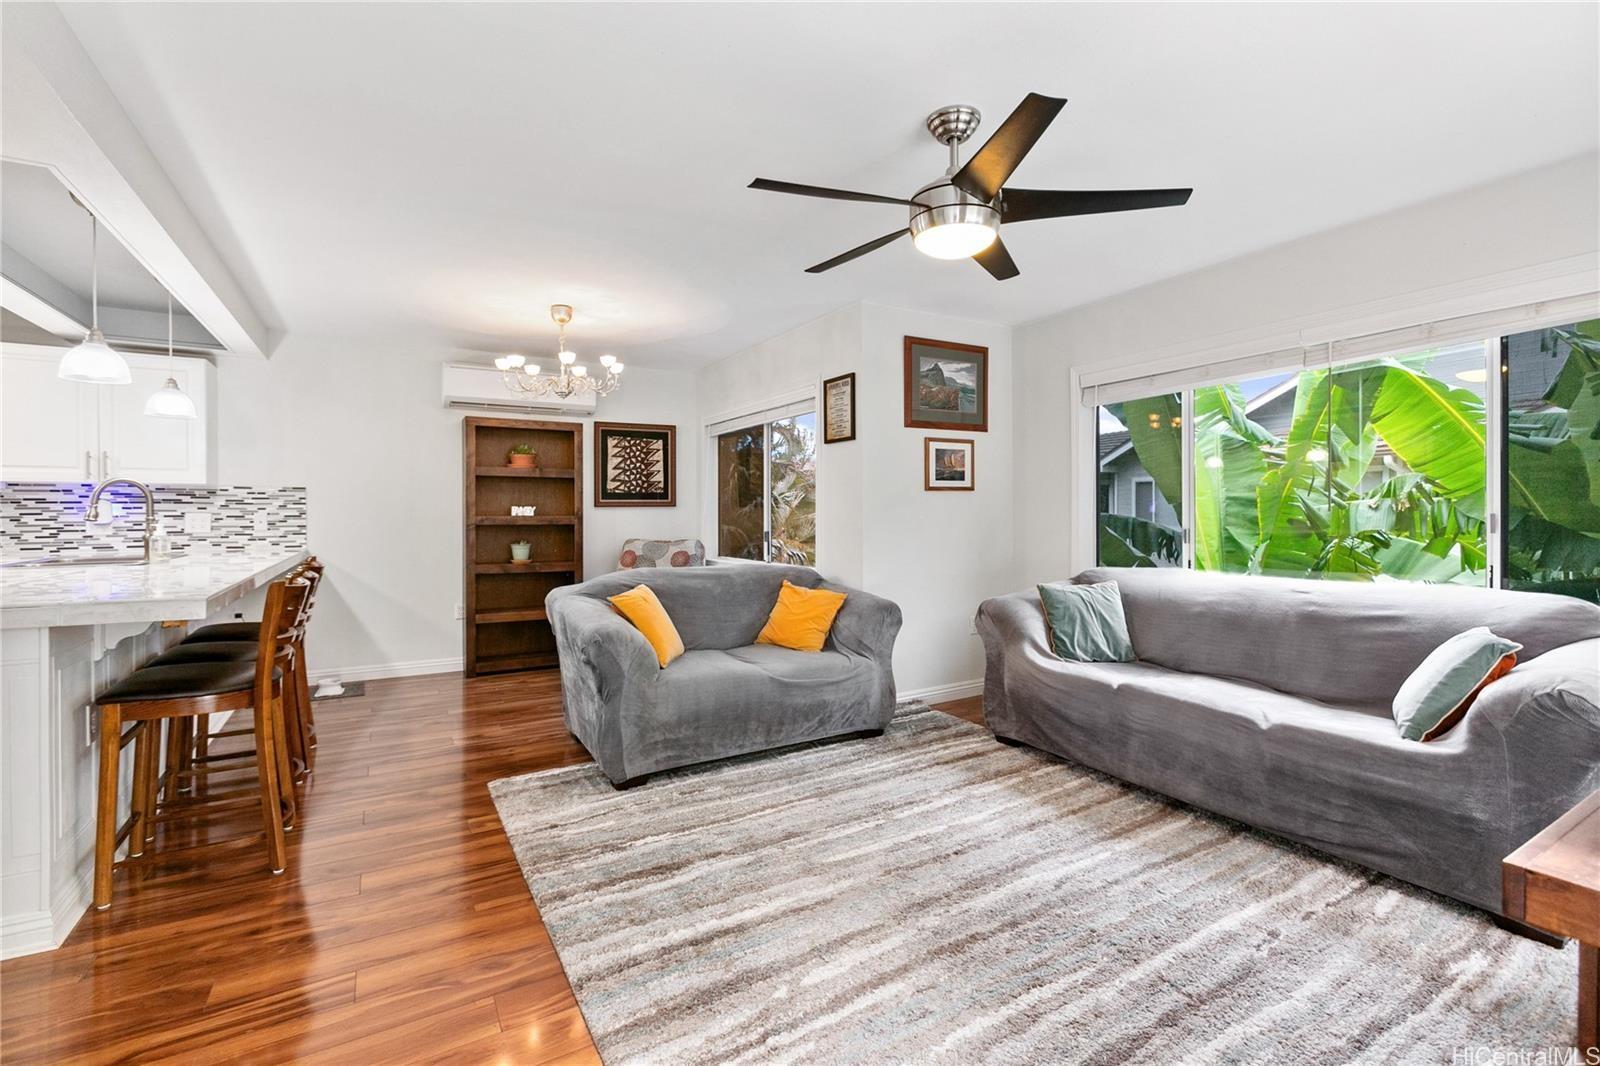 Property Image for 92-1551 Aliinui Drive 17D